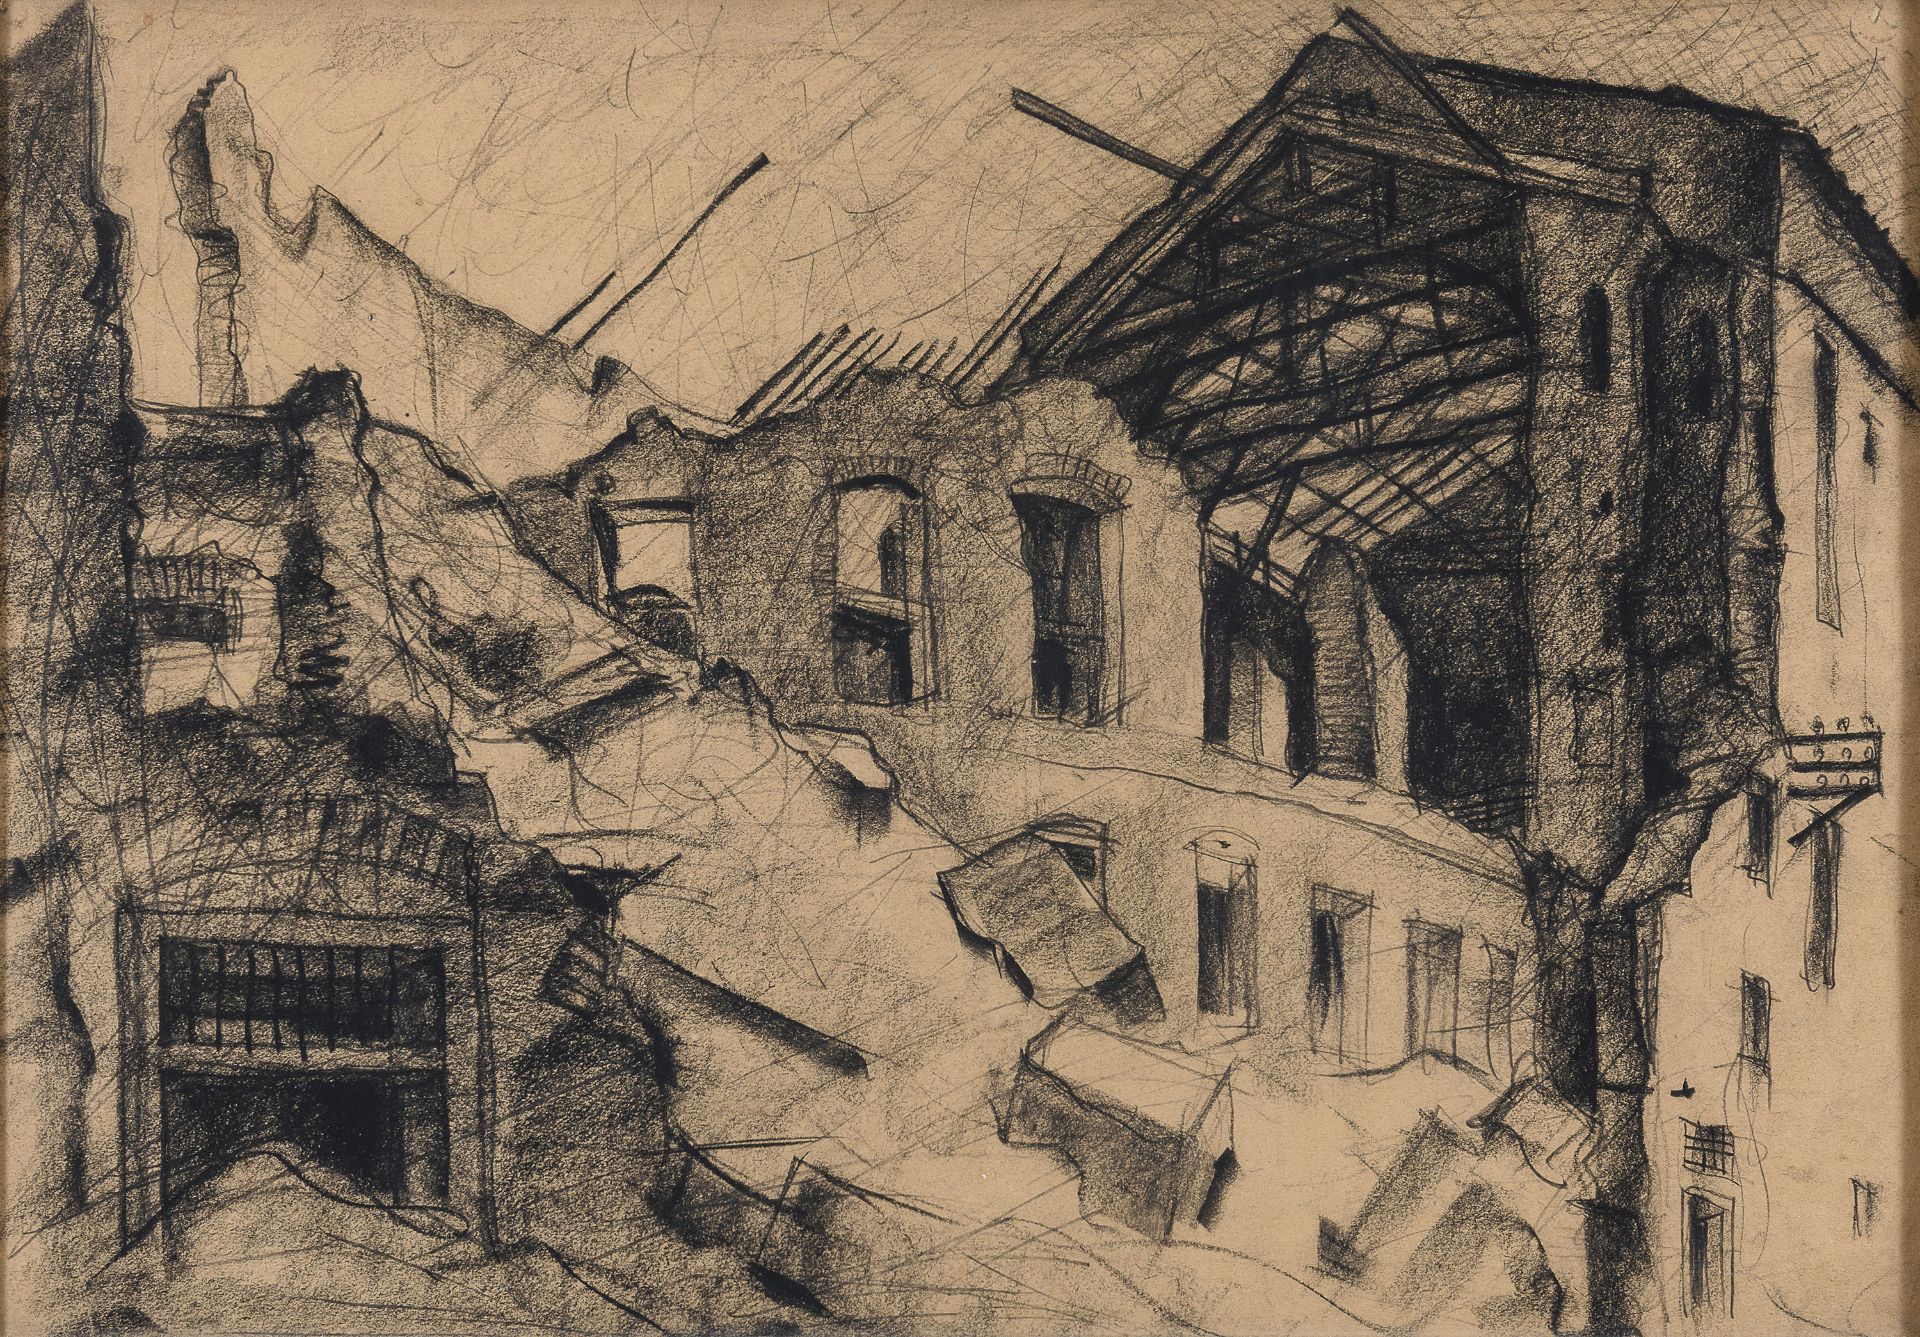 CHARCOAL DRAWING OF THE RUINS OF LIVORNO BY VIRGILIO MARCHI 1946/48